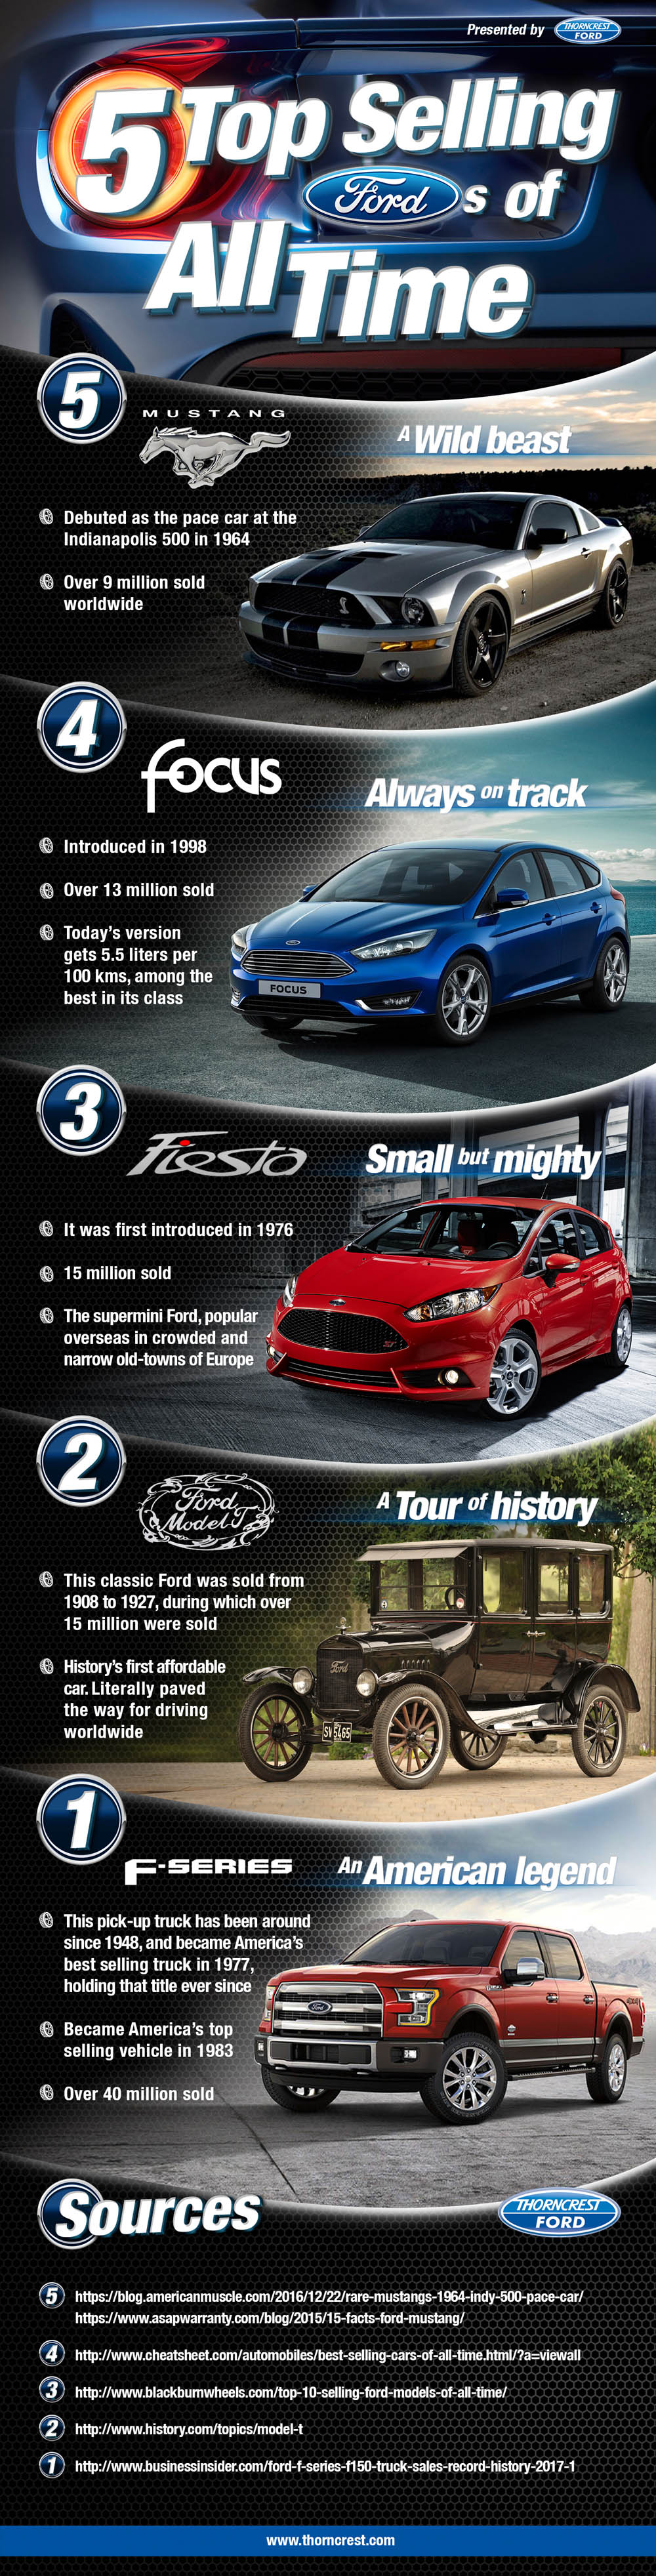 Top 5 Selling Fords of All Time